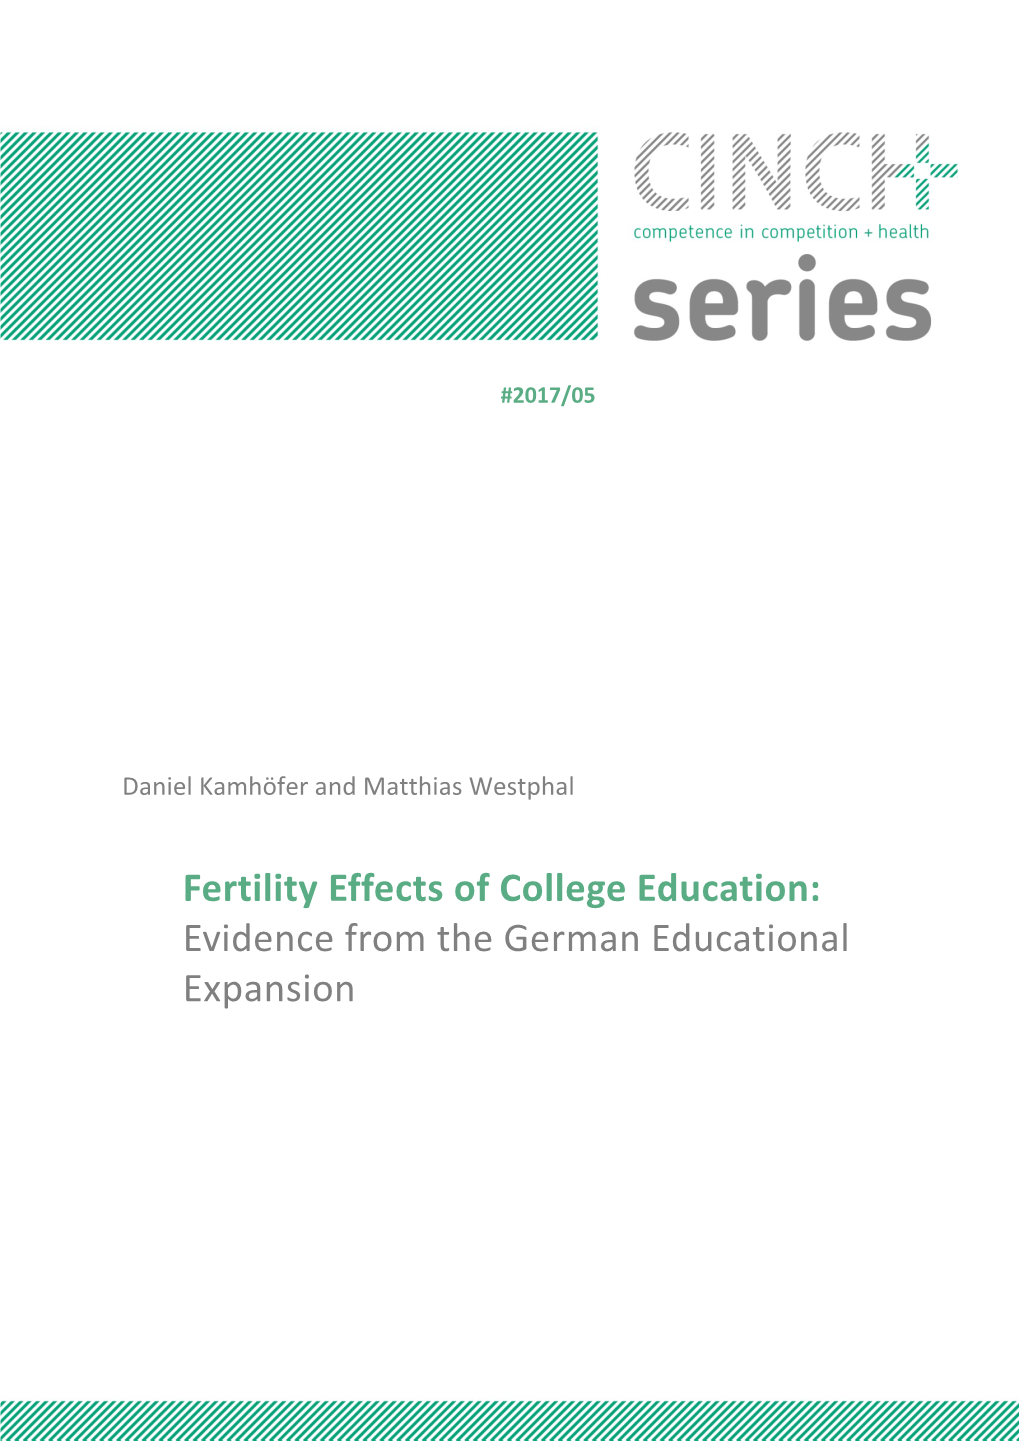 Fertility Effects of College Education: Evidence from the German Educational Expansion